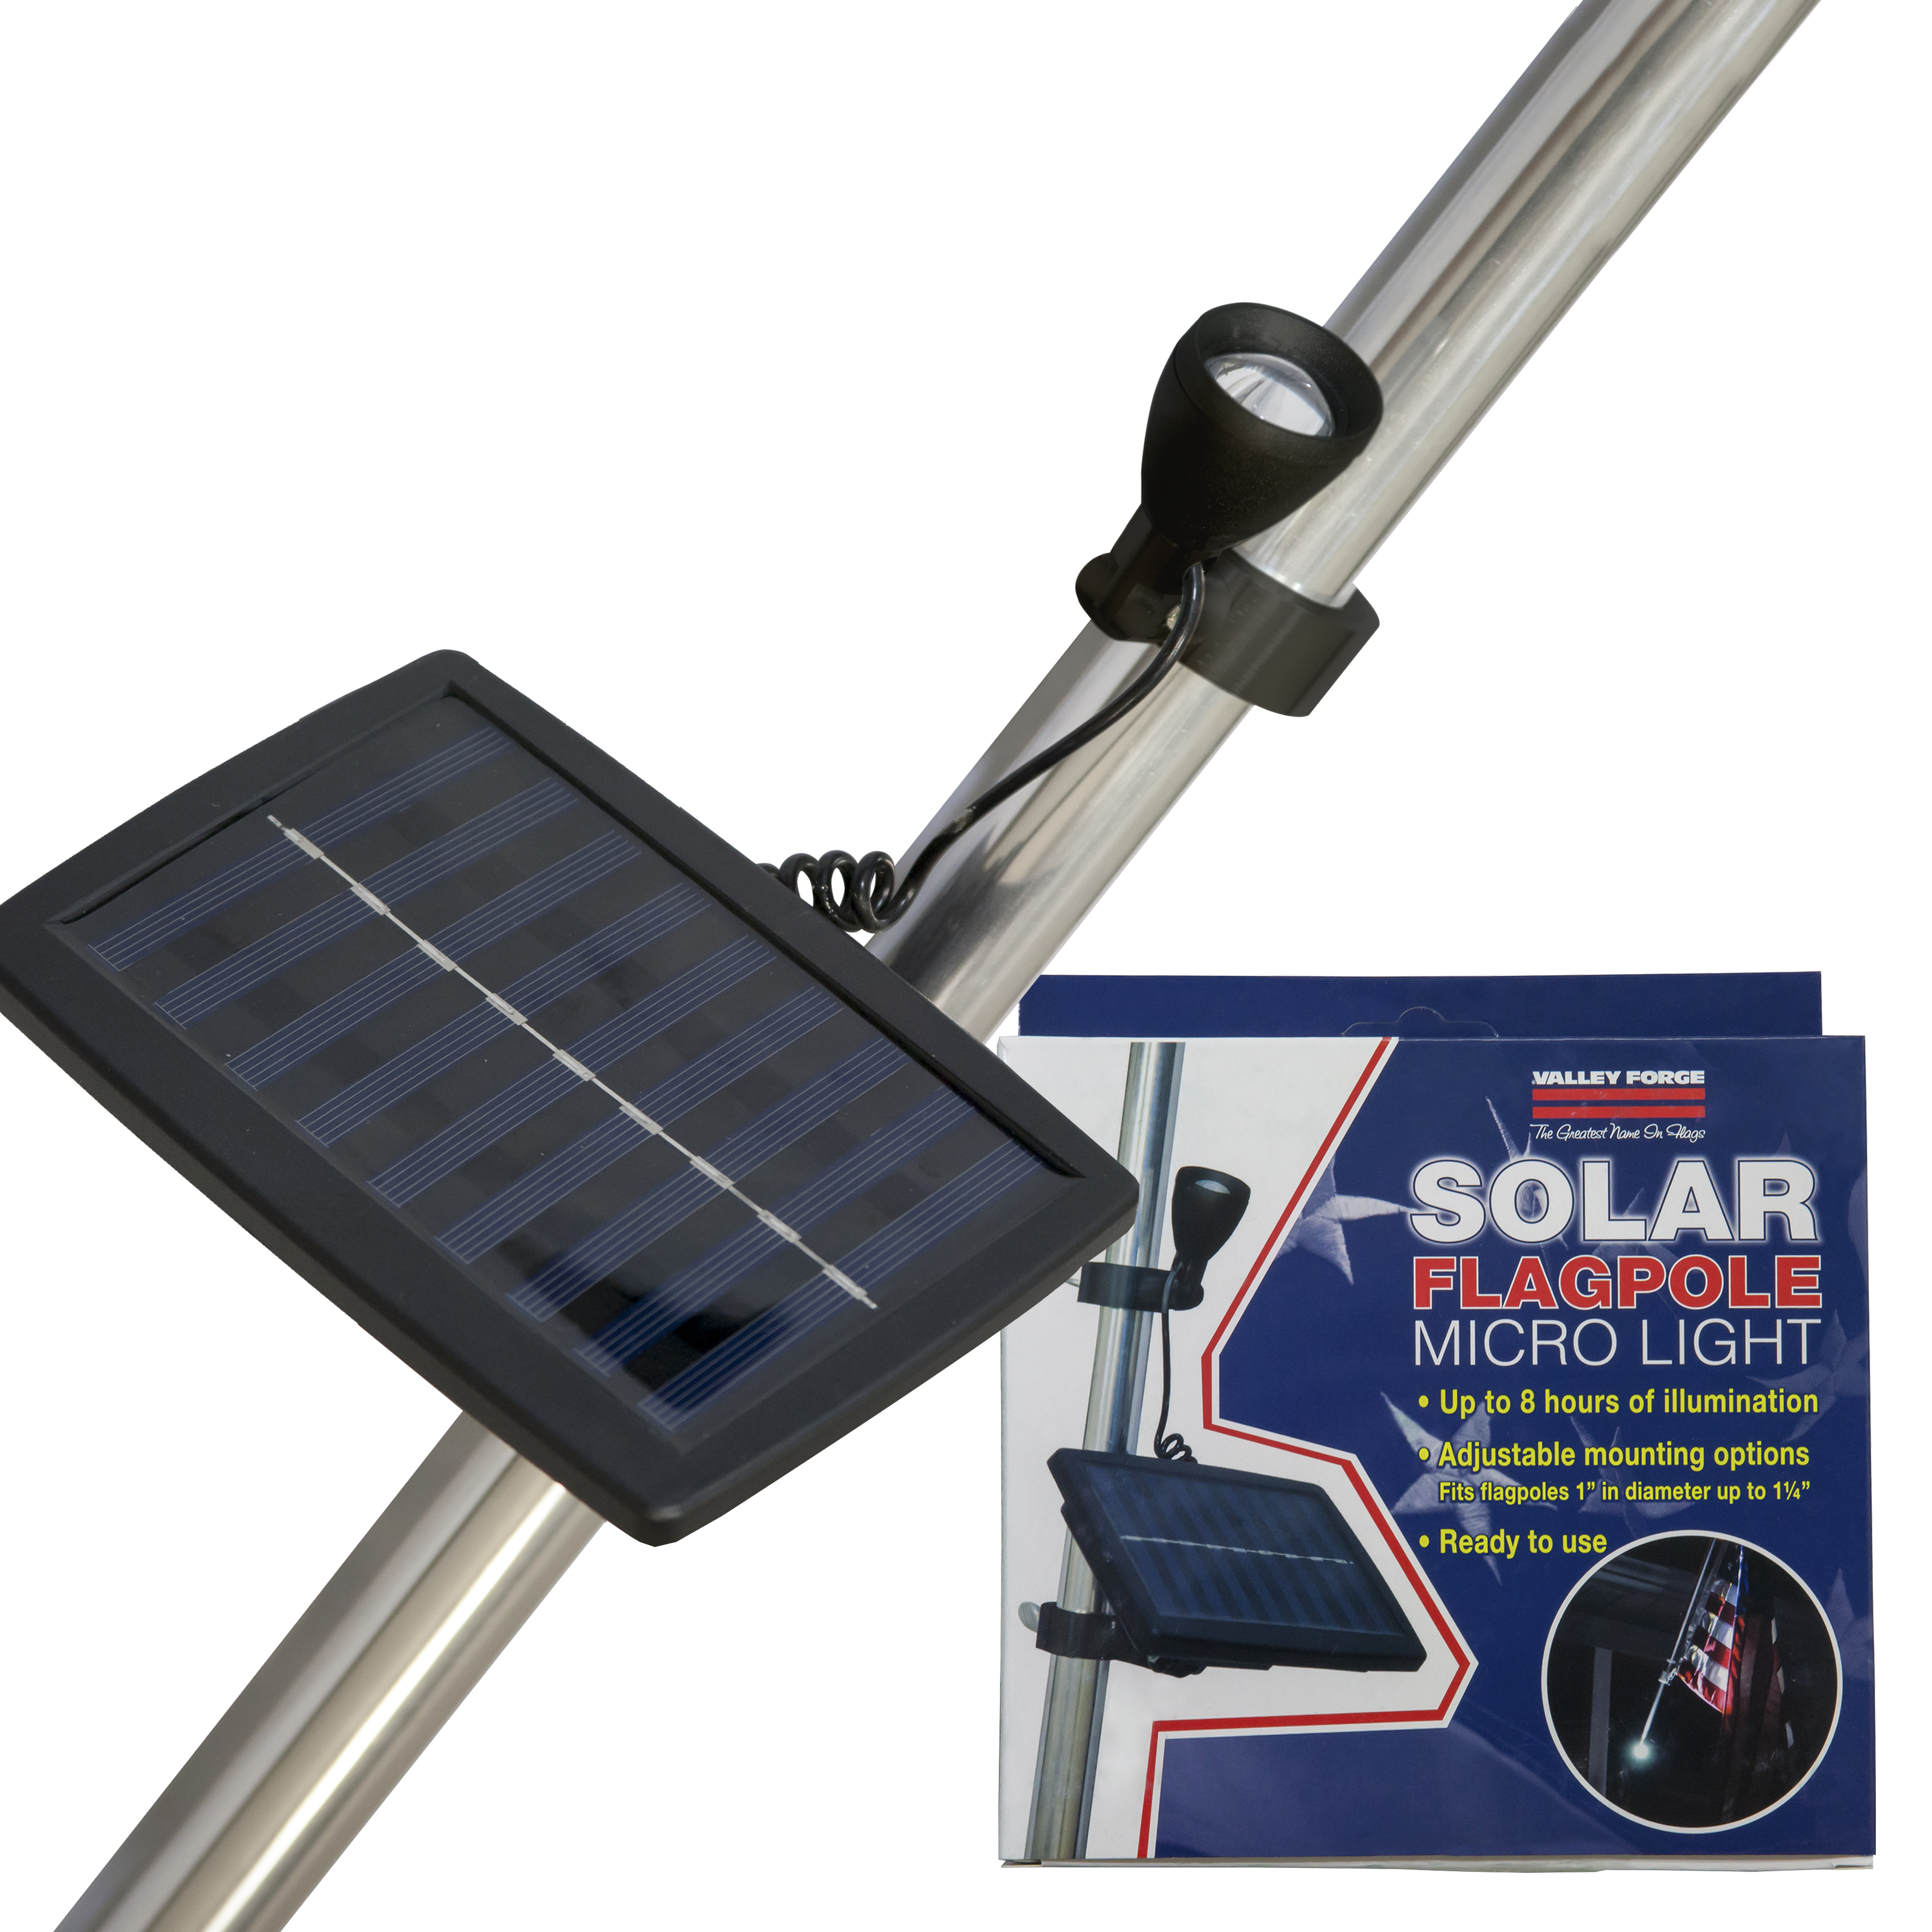 Plastic Solar Flagpole Light for Flags by Valley Forge, Compatible with 1" or 1.25" Flagpole - image 2 of 5